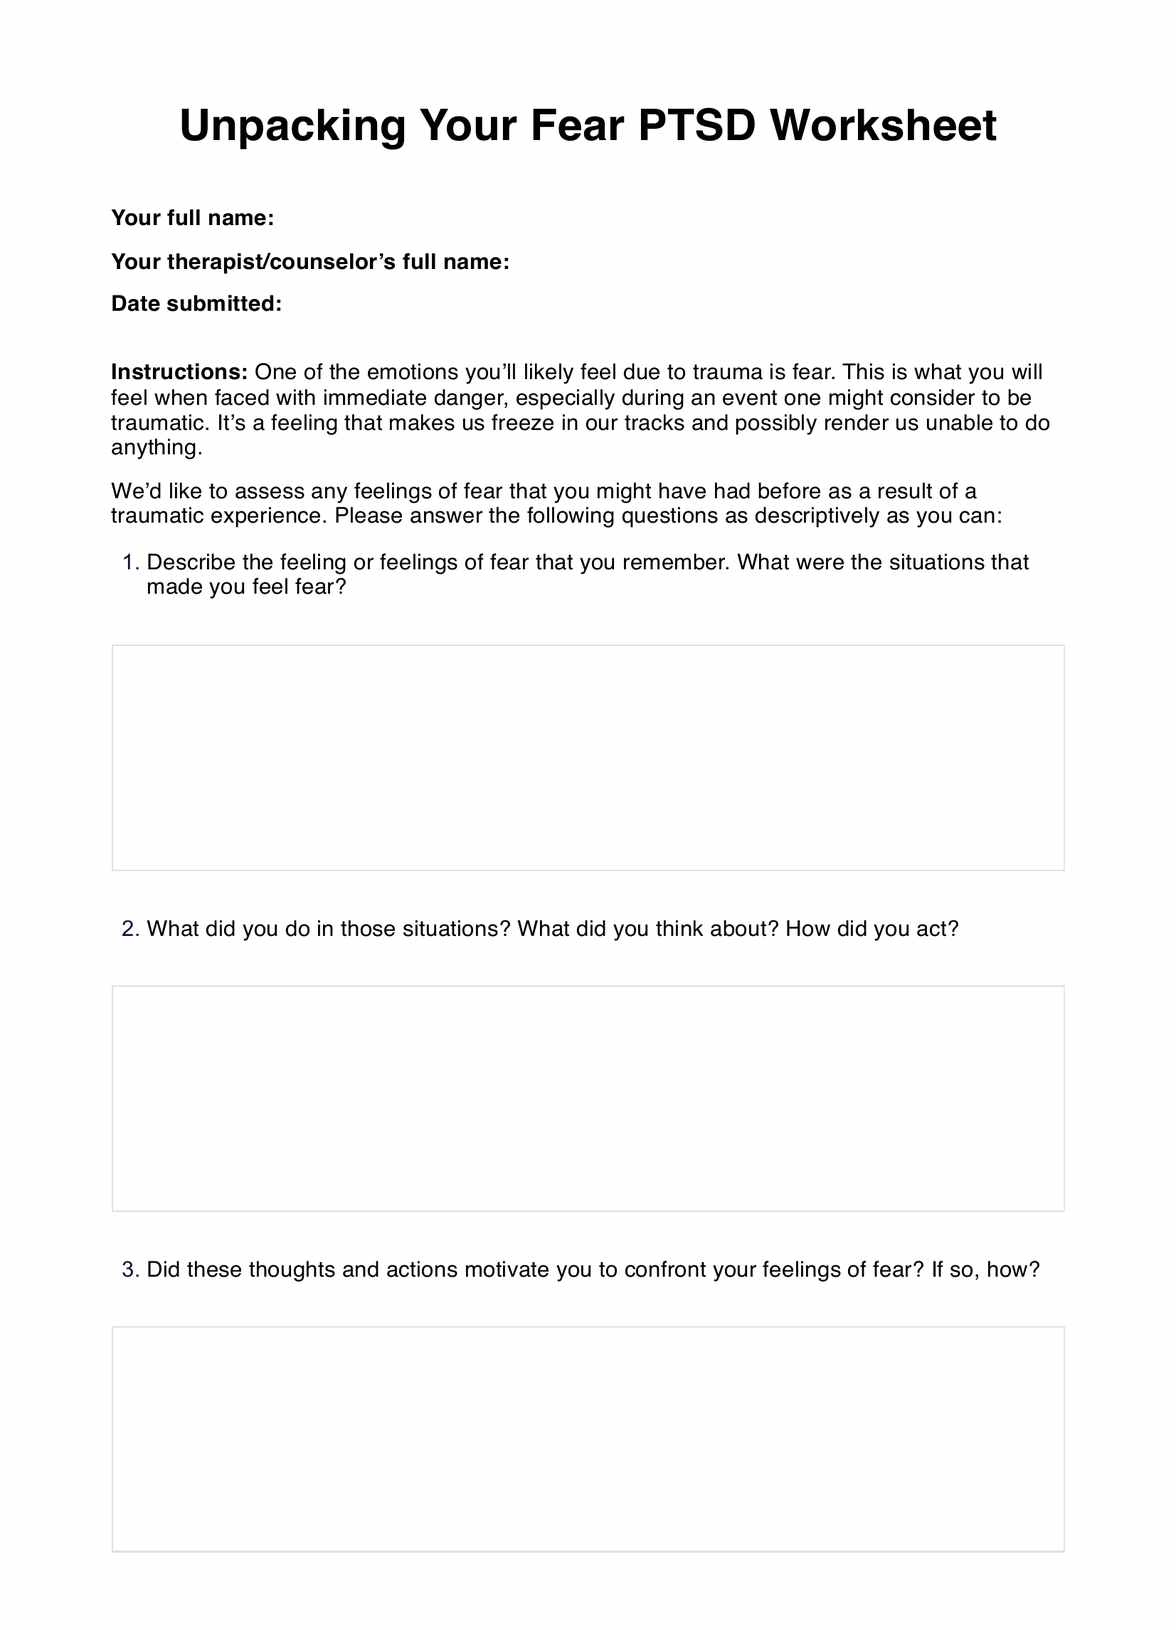 Unpacking Your Fear PTSD Worksheet PDF Example